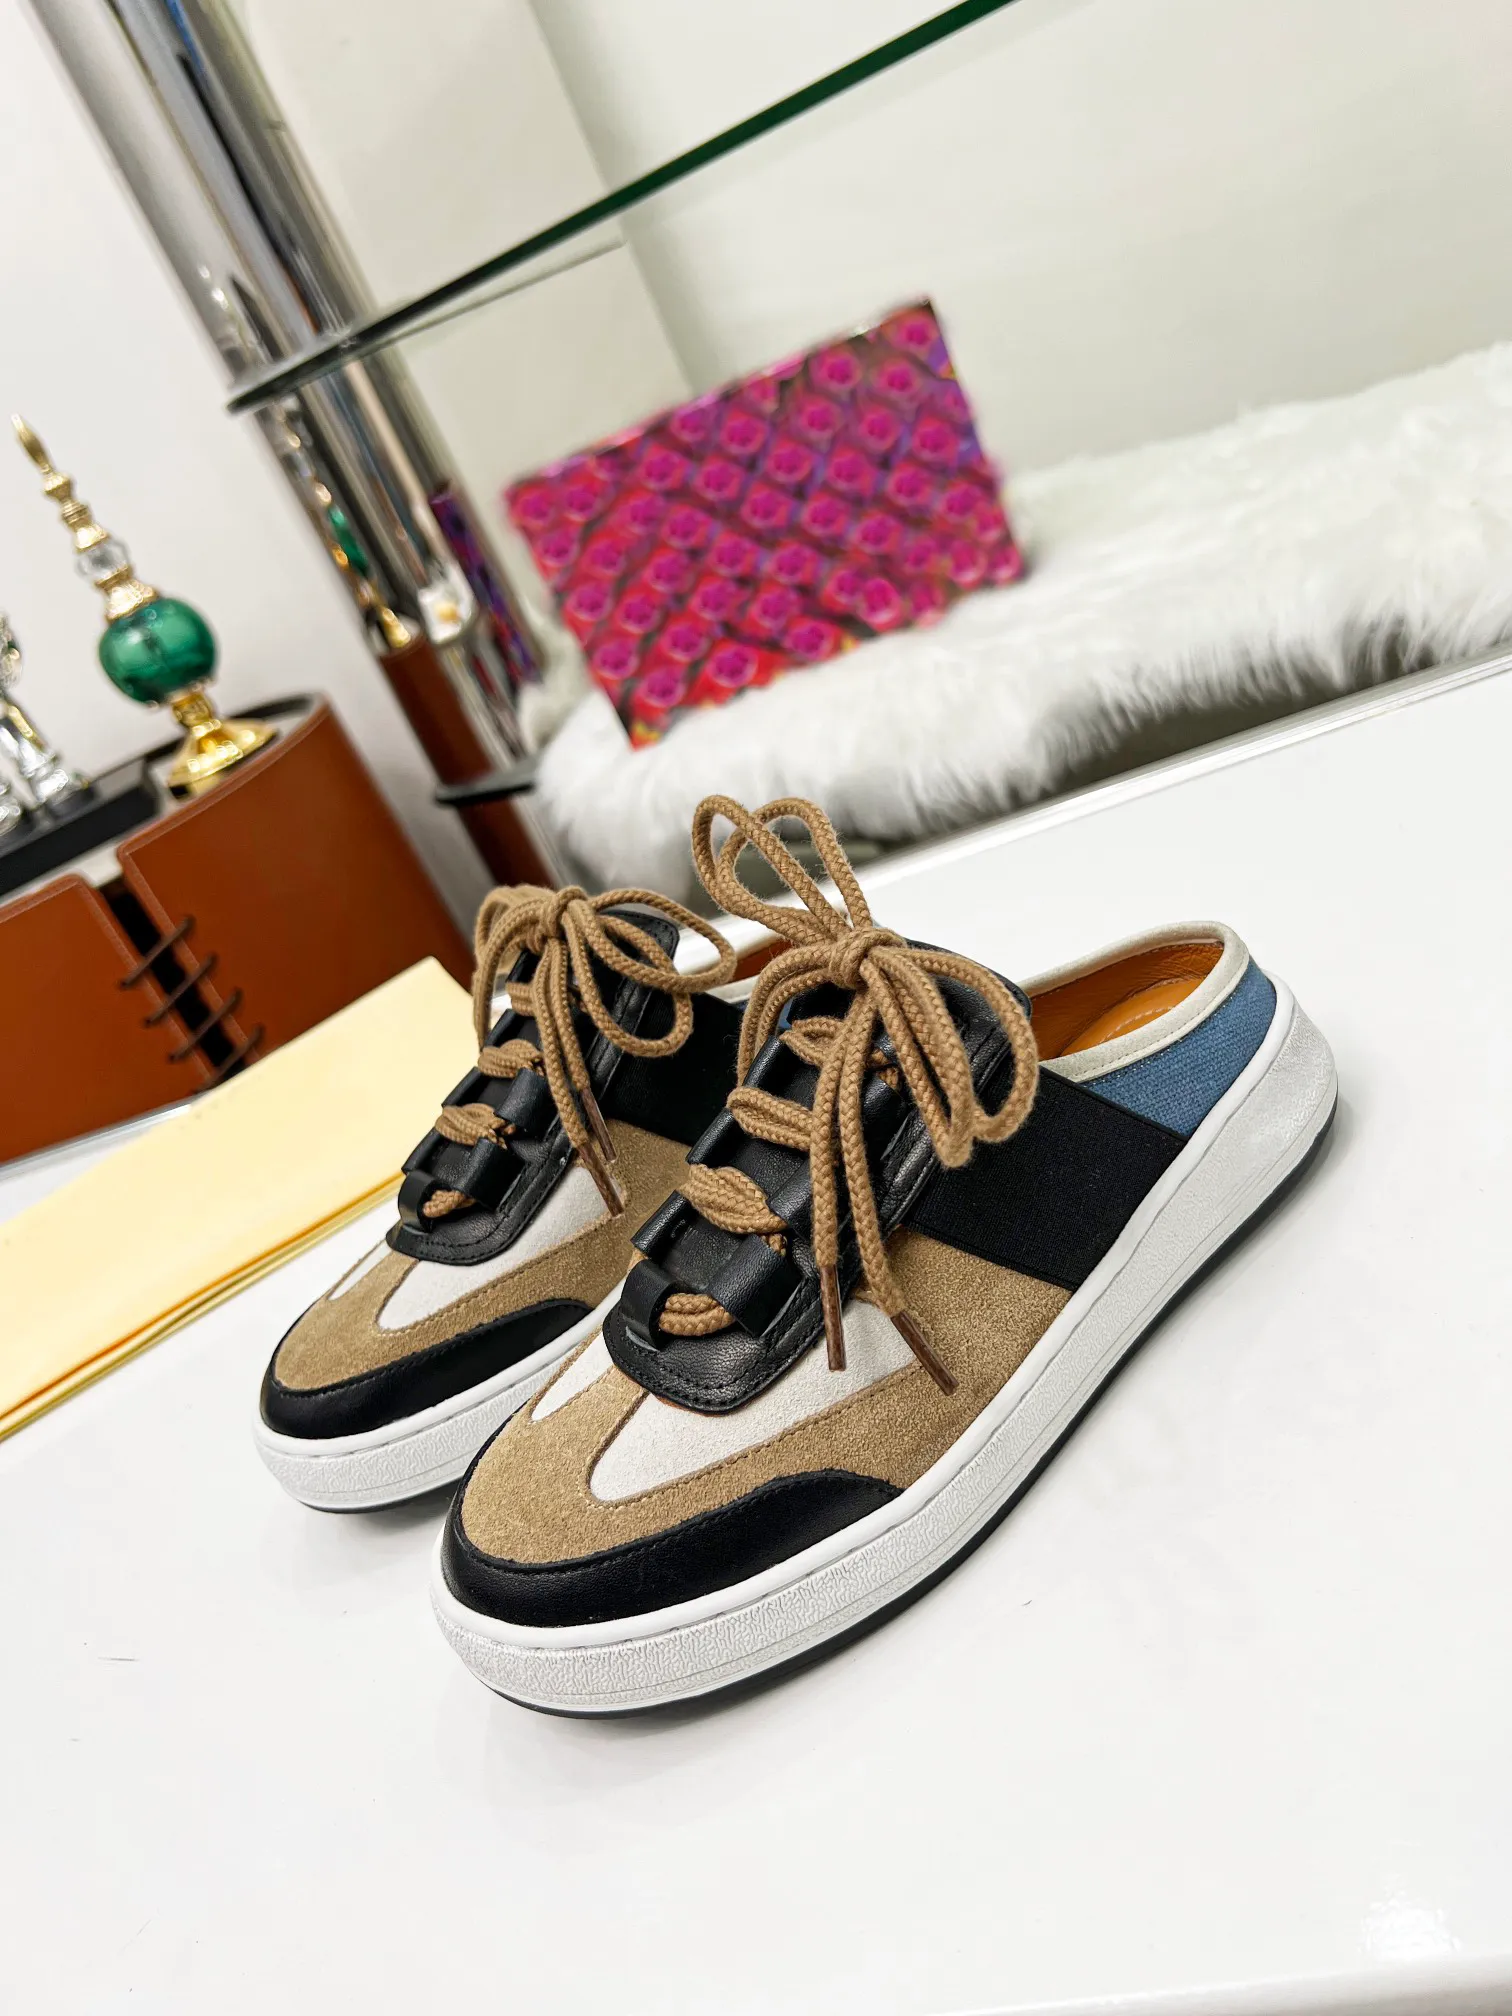 2022 Fall Slip-on Sneakers Designer Lace-Up Slippers Black Brown Casual Shoes Fashion All-match Sneakers Flat Slipperss With Box Size 35-41